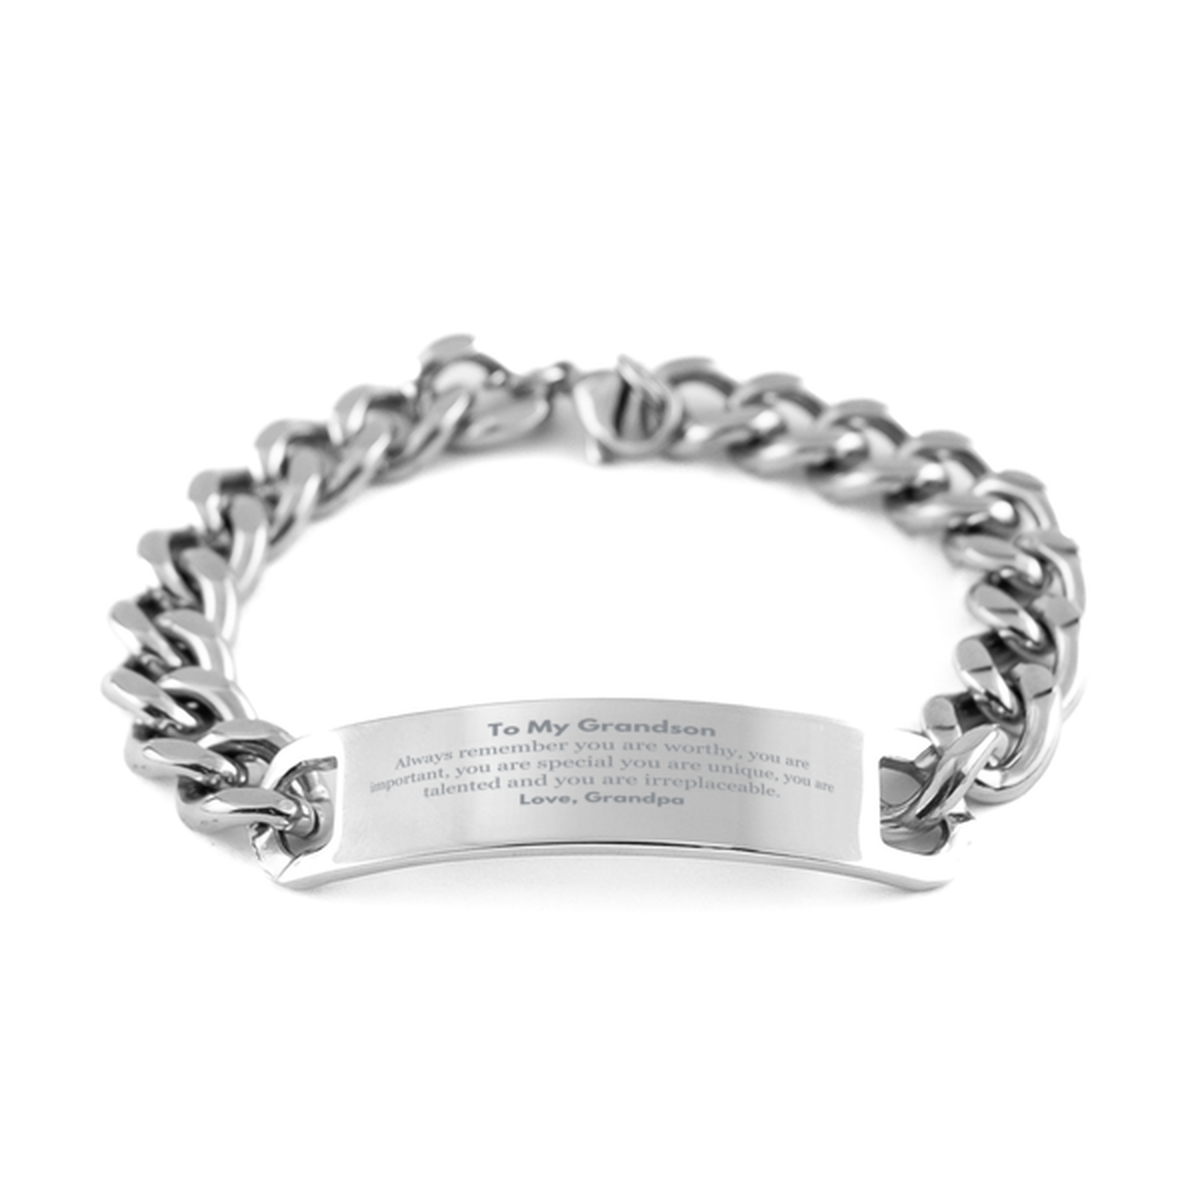 Grandson Birthday Gifts from Grandpa, Inspirational Cuban Chain Stainless Steel Bracelet for Grandson Christmas Graduation Gifts for Grandson Always remember you are worthy, you are important. Love, Grandpa